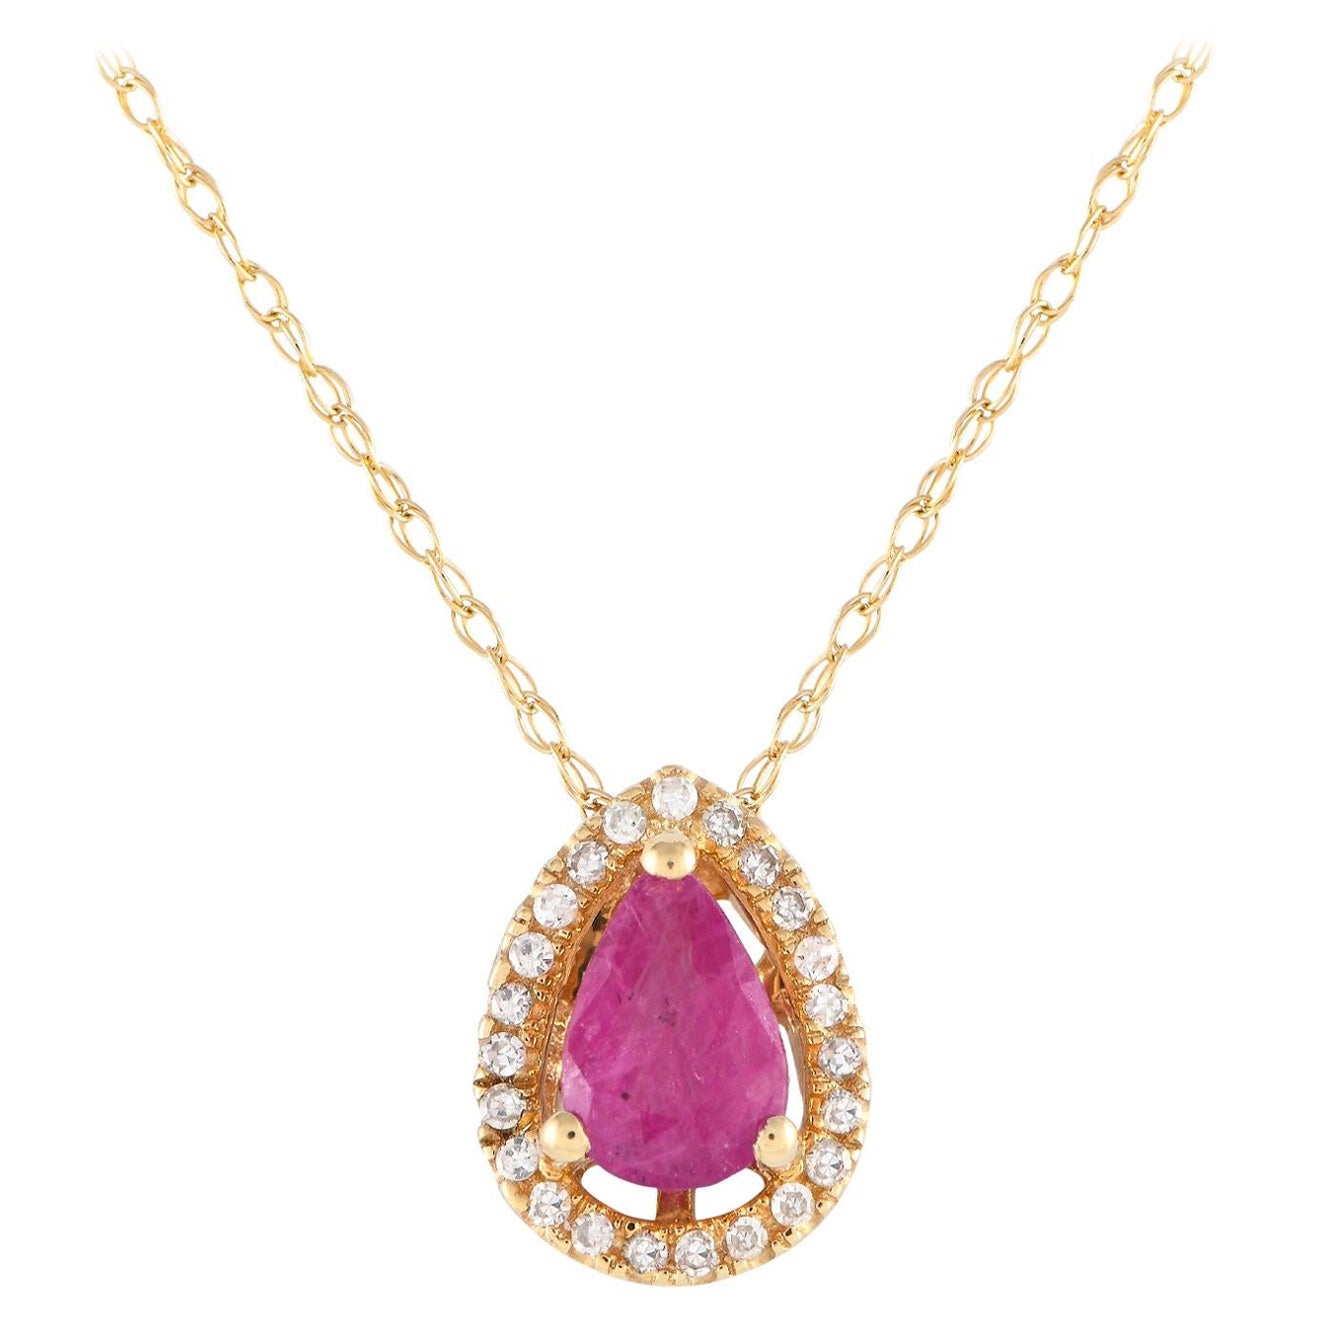 LB Exclusive 14K Yellow Gold 0.07ct Diamond and Ruby Pear Necklace PD4-15949YRU For Sale